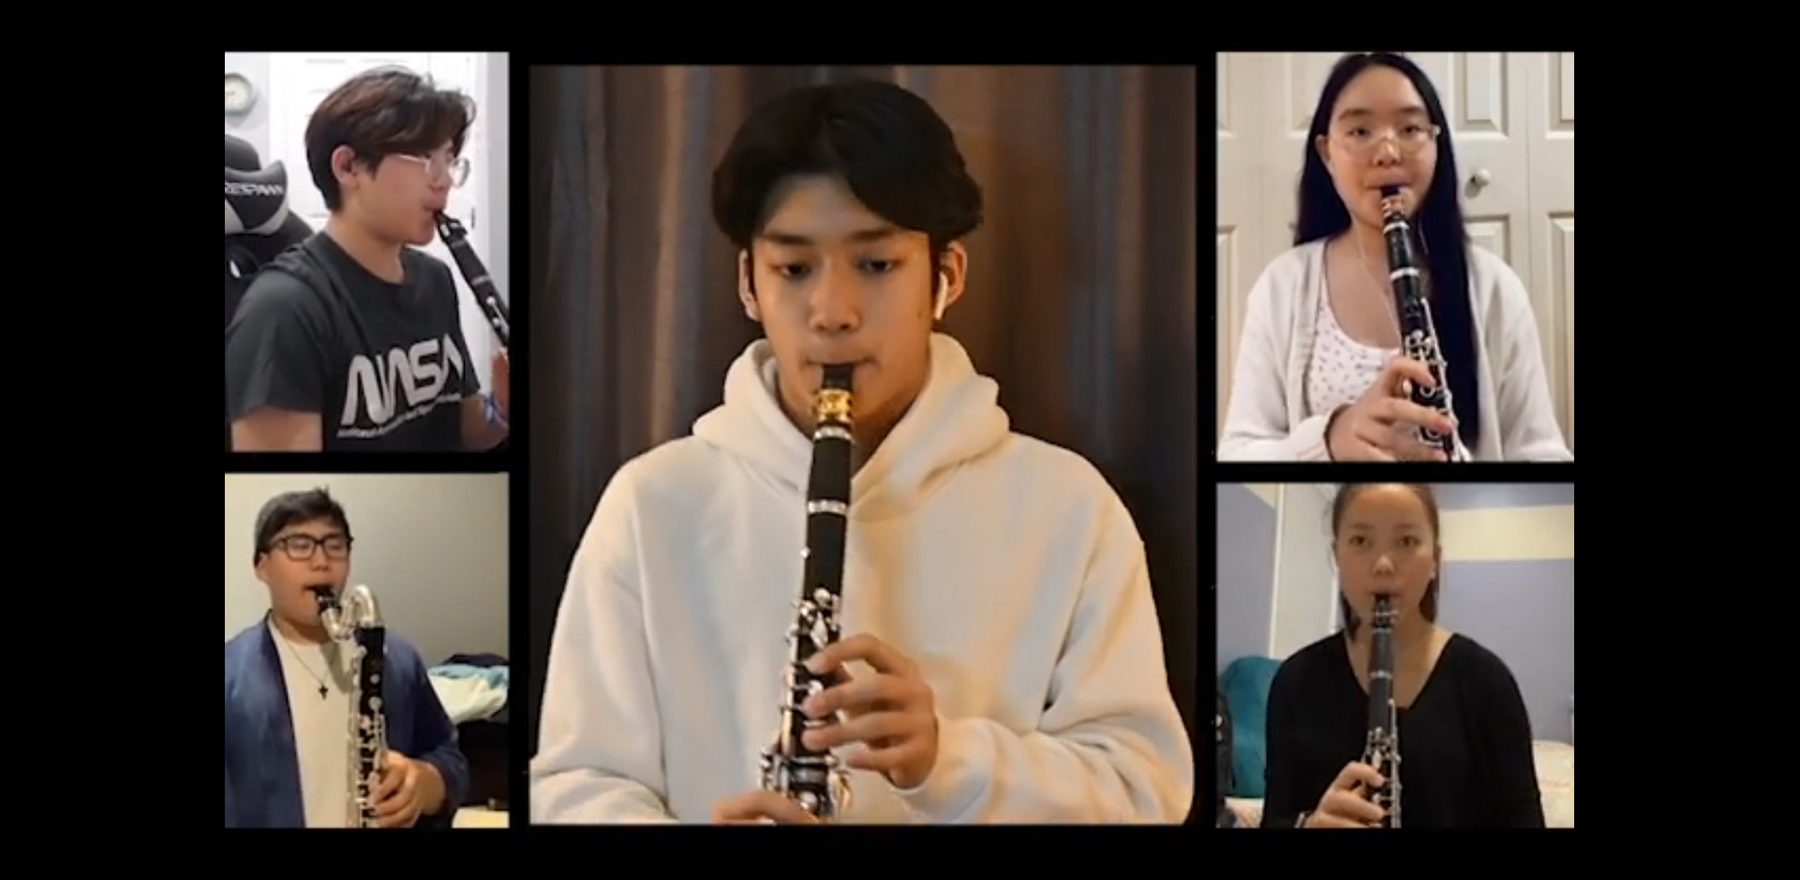 A virtual chamber music concert featuring the clarinet section of the New York Youth Symphony.